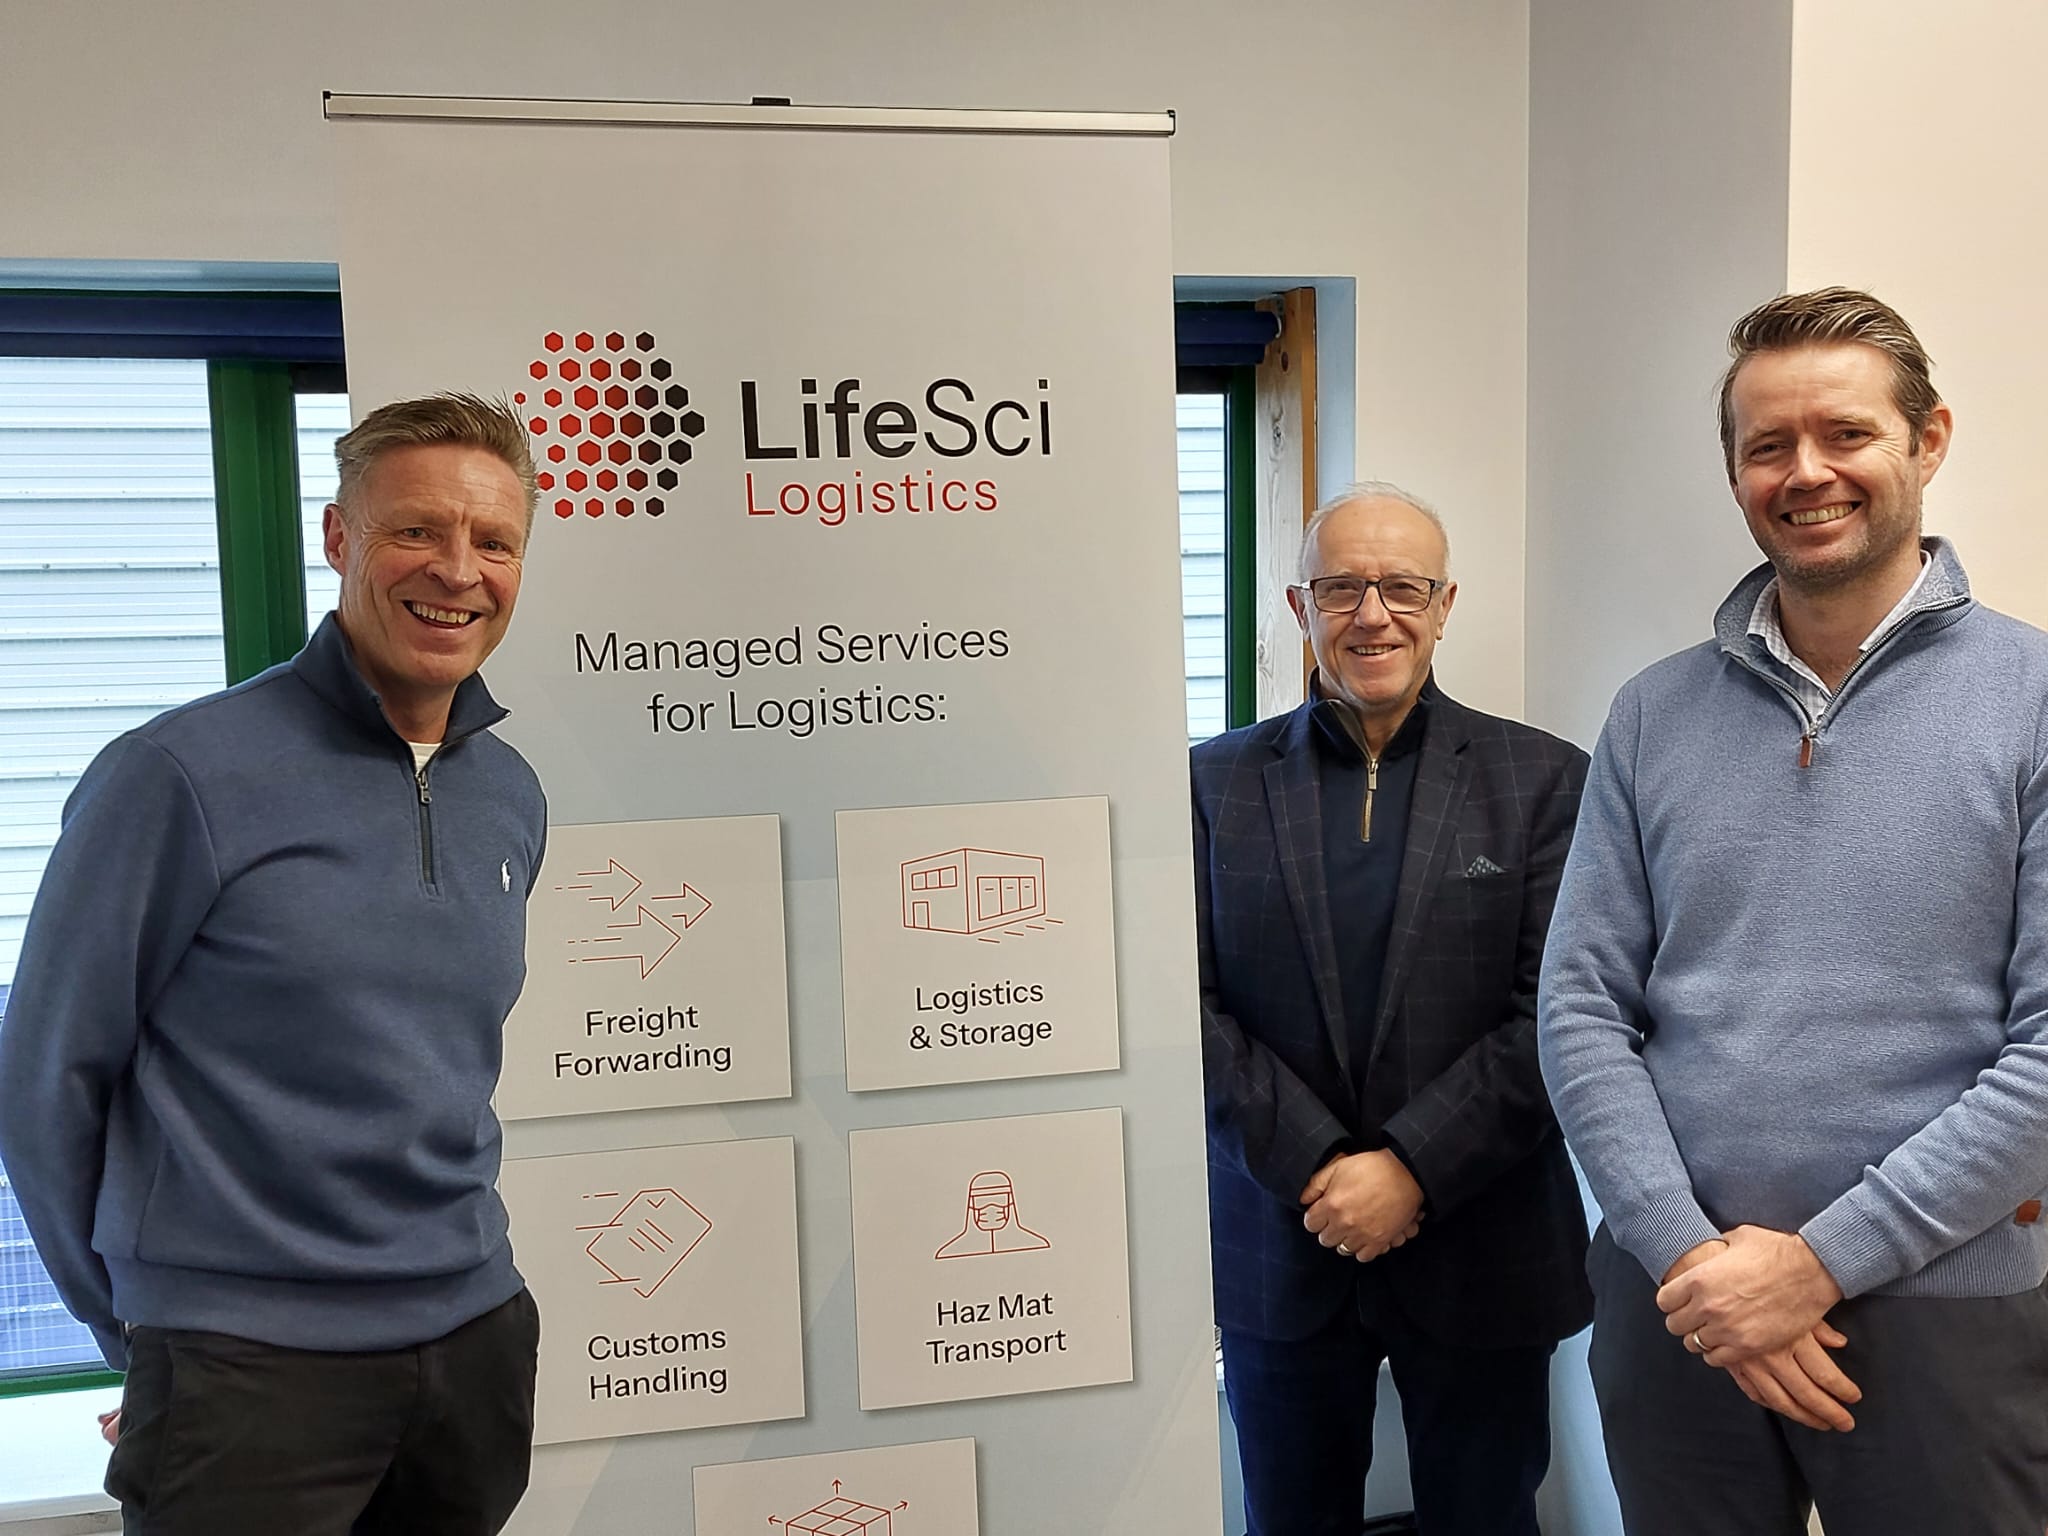 Isofield partners with LifeSci Logistics in 3 year EU logistics managed services deal.